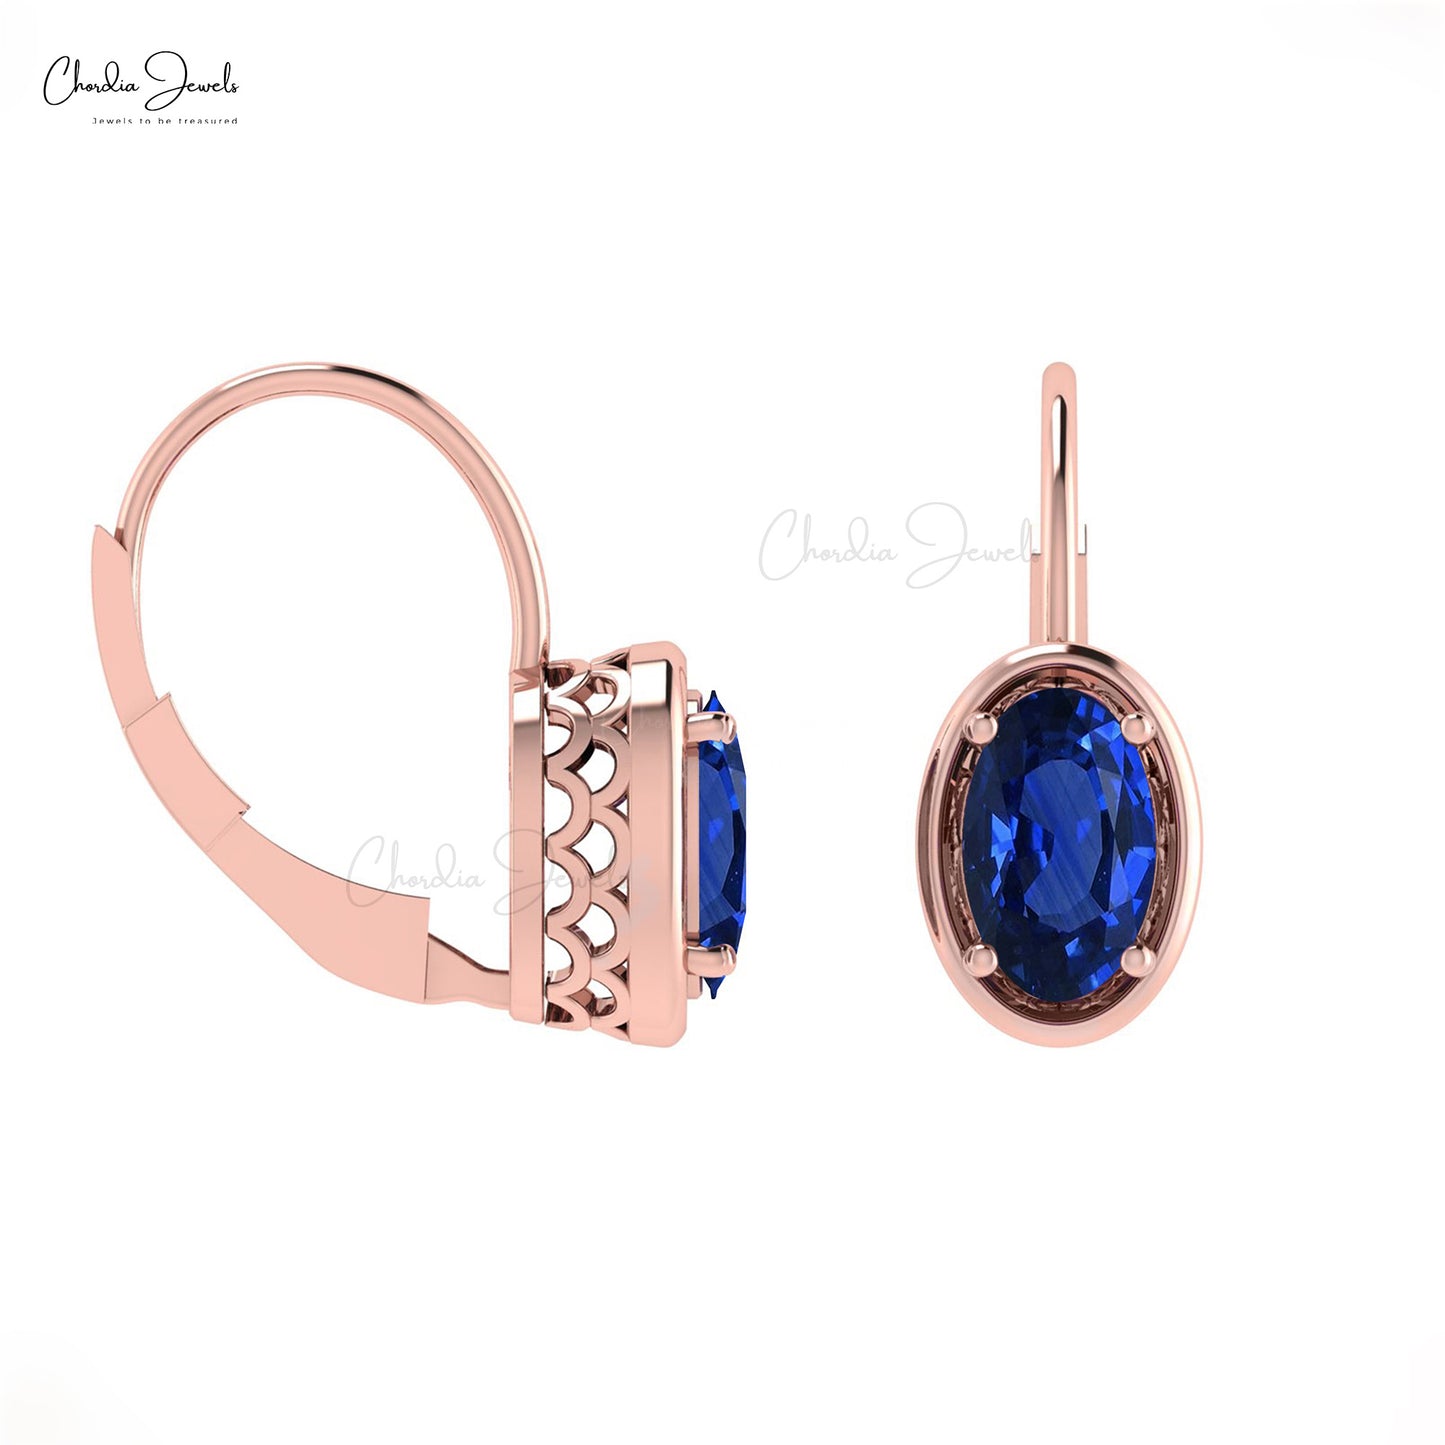 High Quality Minimalist Leverback Earrings Oval Shape Natural Blue Sapphire Gemstone Earring For Women 14k Solid Gold Light Weight Jewelry For Gift